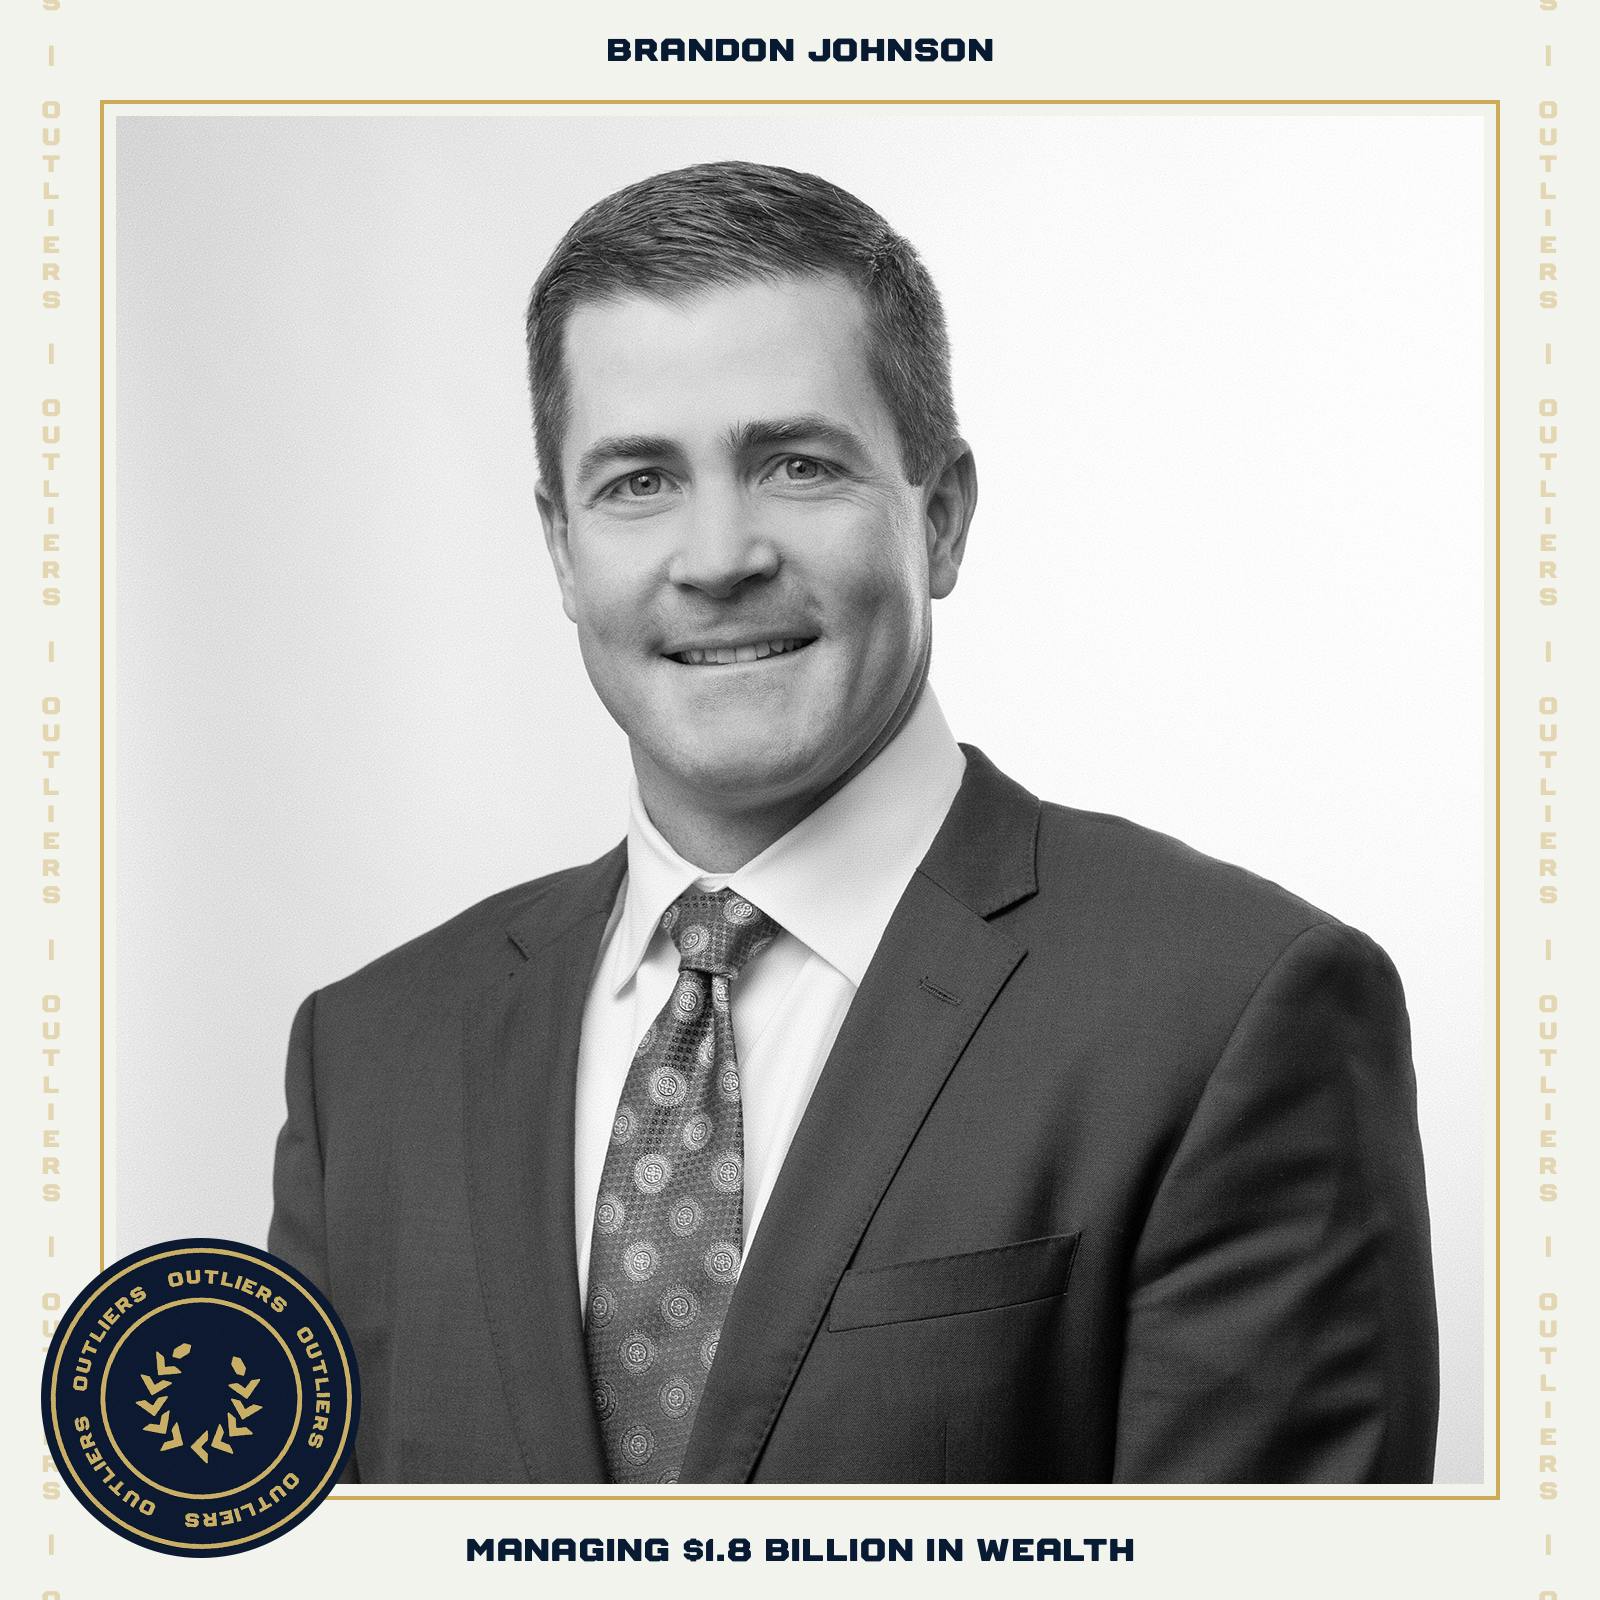 All-Time Top 10 Guests – #9 Brandon Johnson (JFG Multi-Family Office: On Managing $1.8 Billion in Wealth, Investment Philosophy, and Teaching Kids About Money) Image